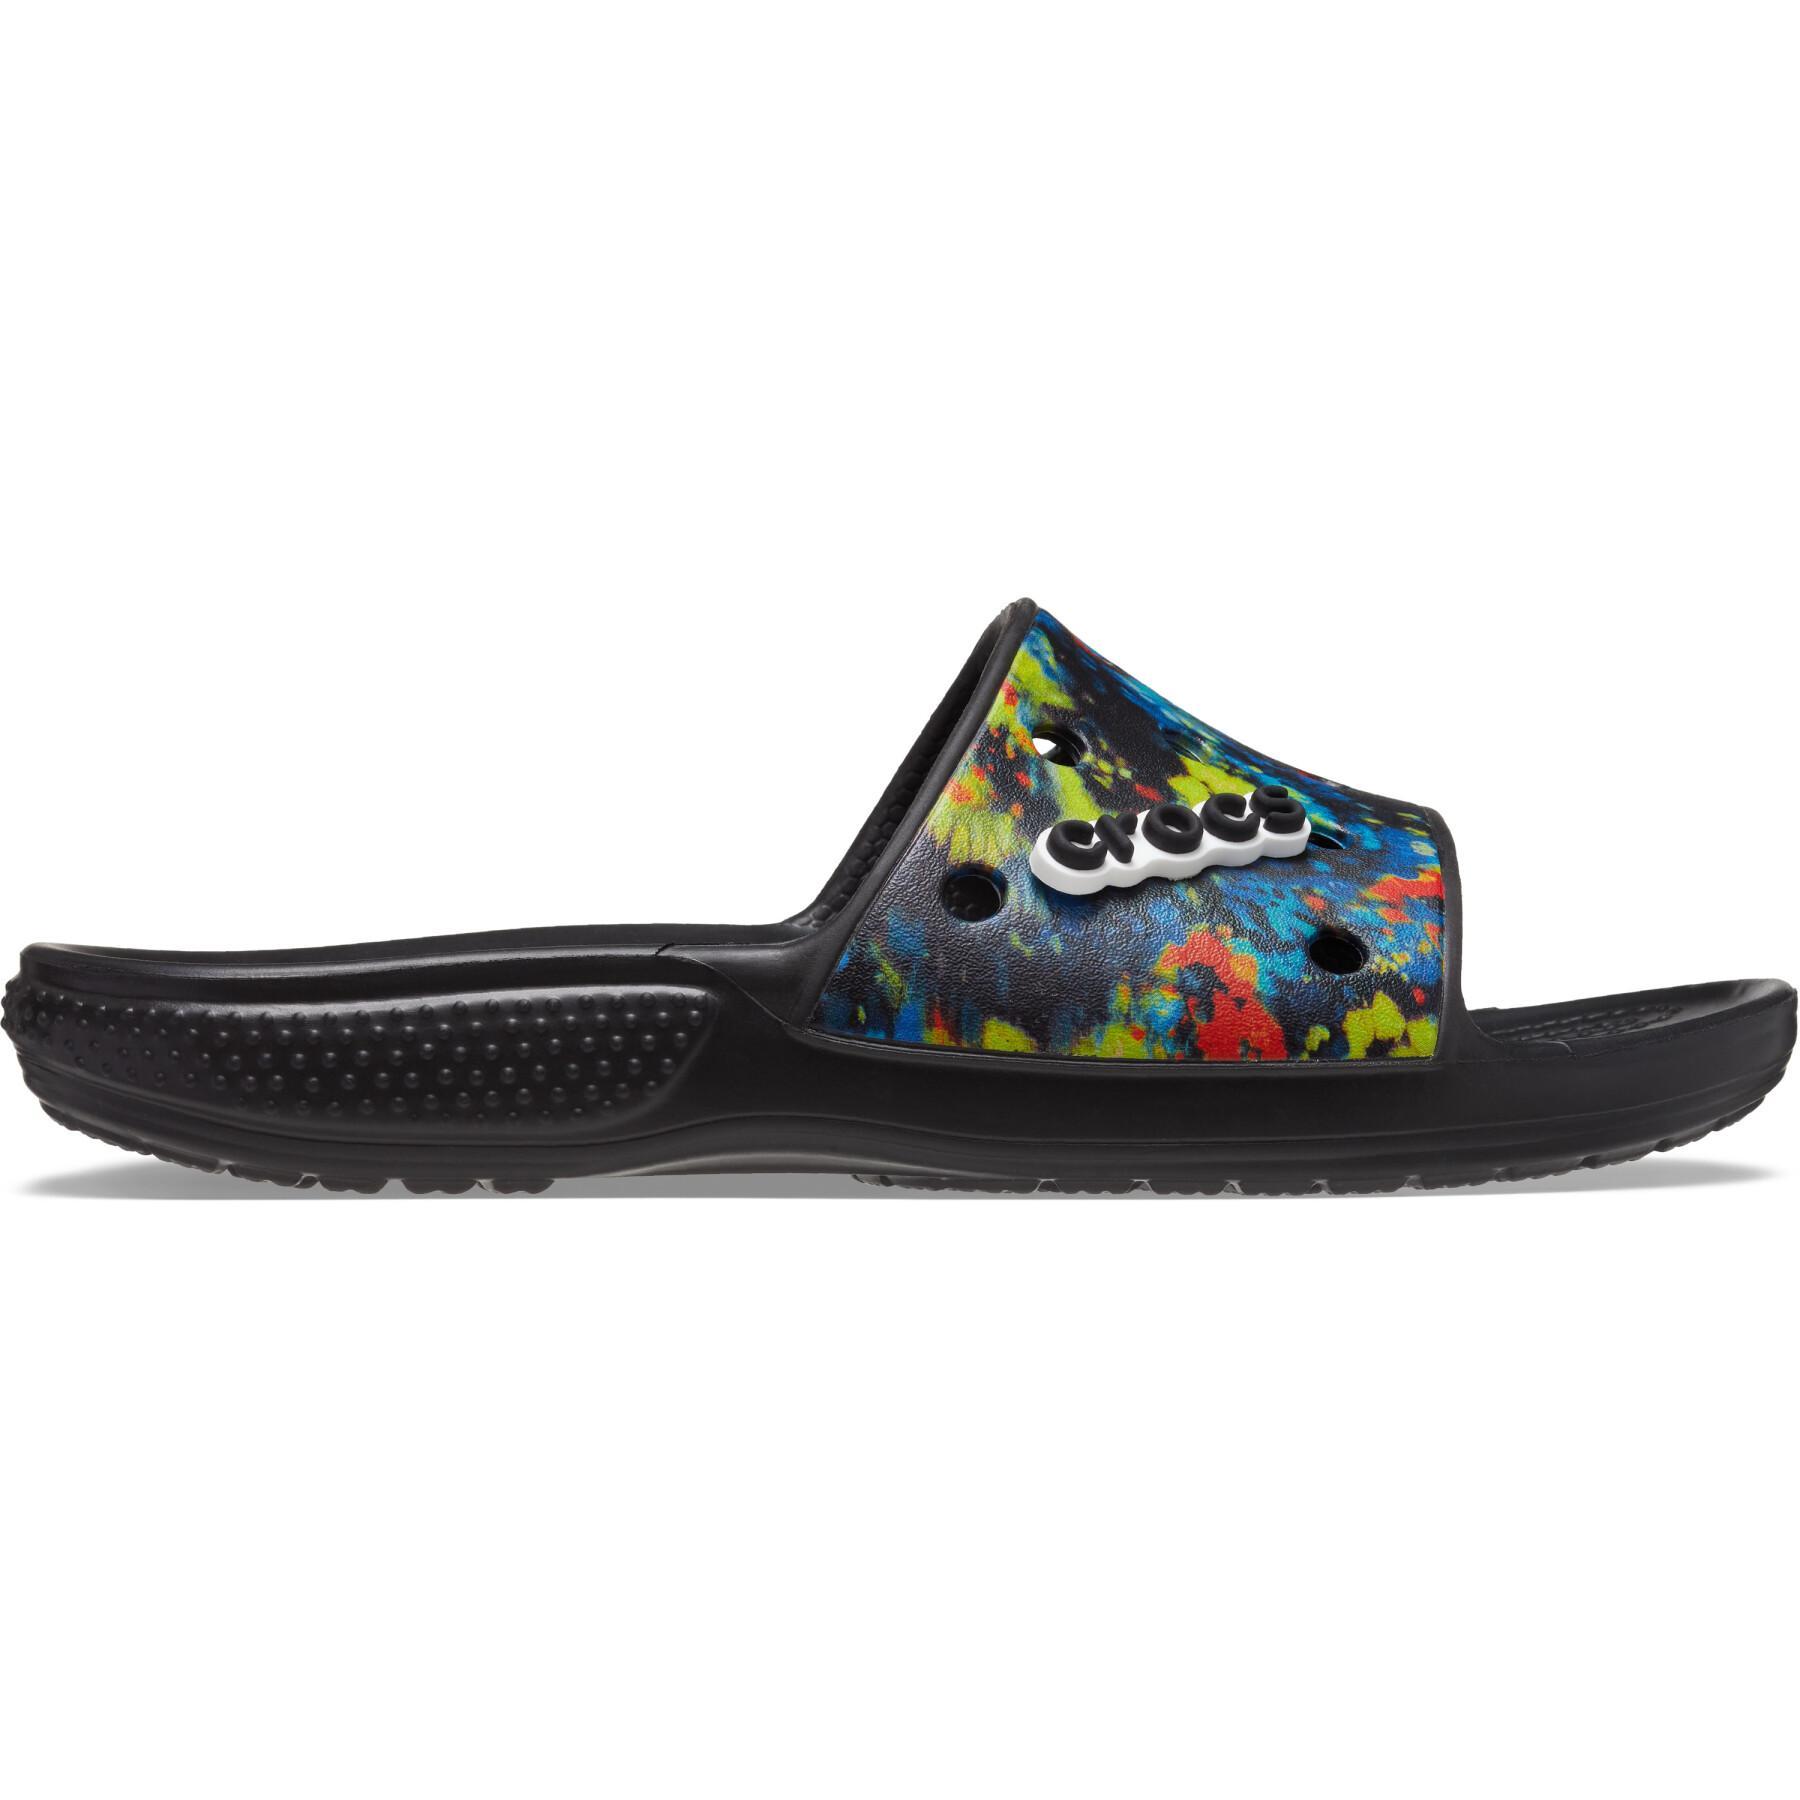 Tap shoes Crocs classic tiedye grphc sld